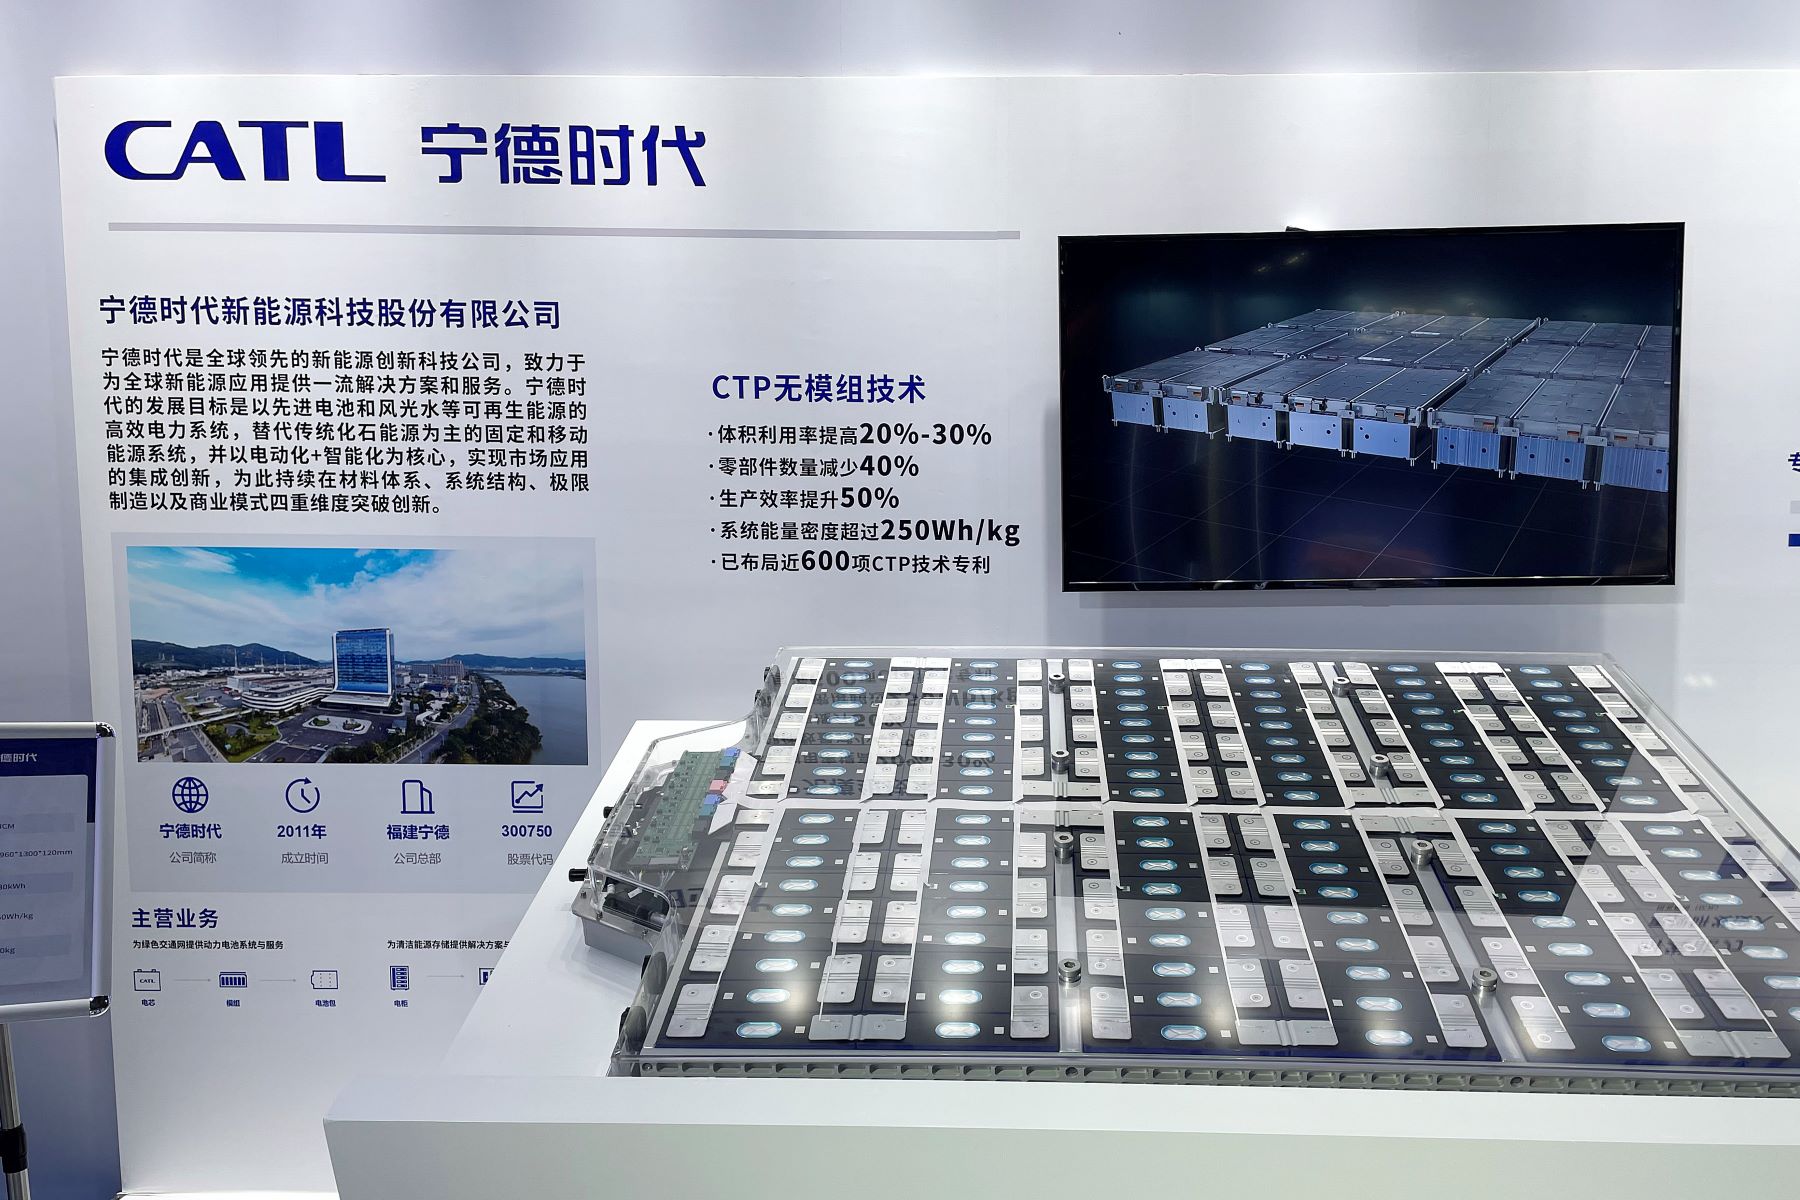 CATL (Contemporary Amperex Technology Co LTD) booth at the 2021 World Intelligent Connected Vehicles (WICV) Conference in Beijing, China